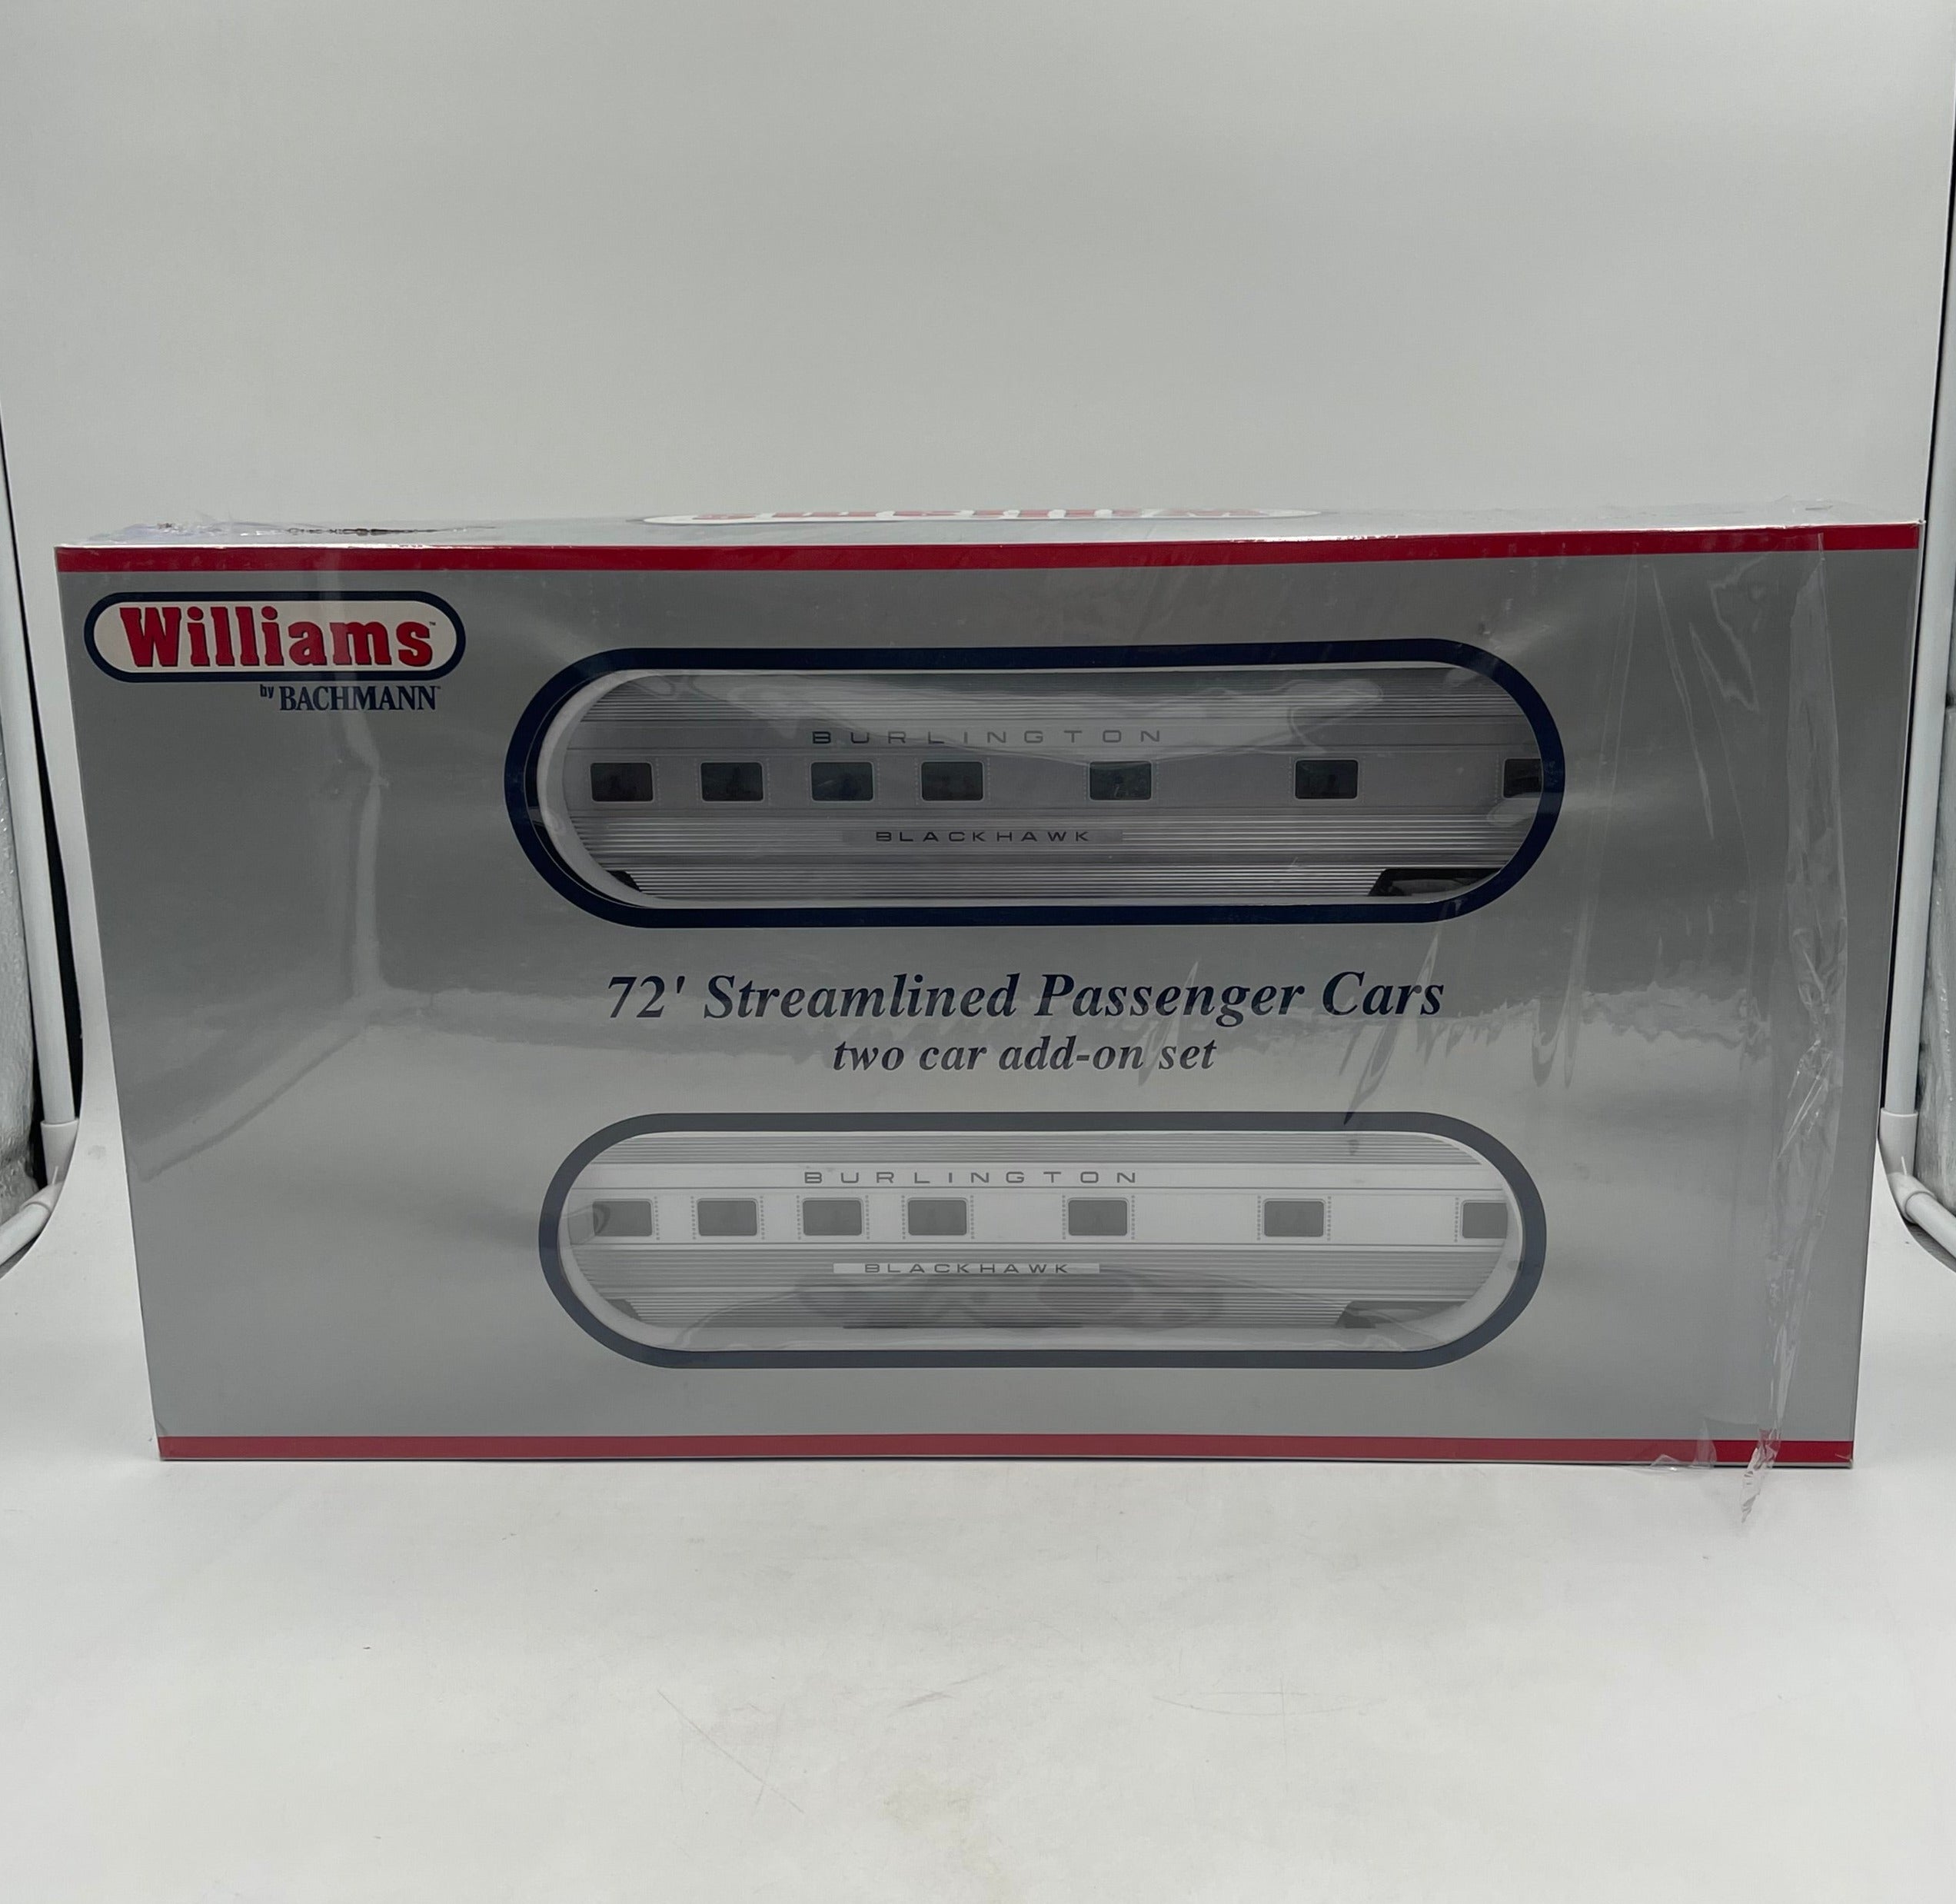 Williams by Bachmann 72' Streamlined Passenger Cars Two Car Add-On Set - 43104